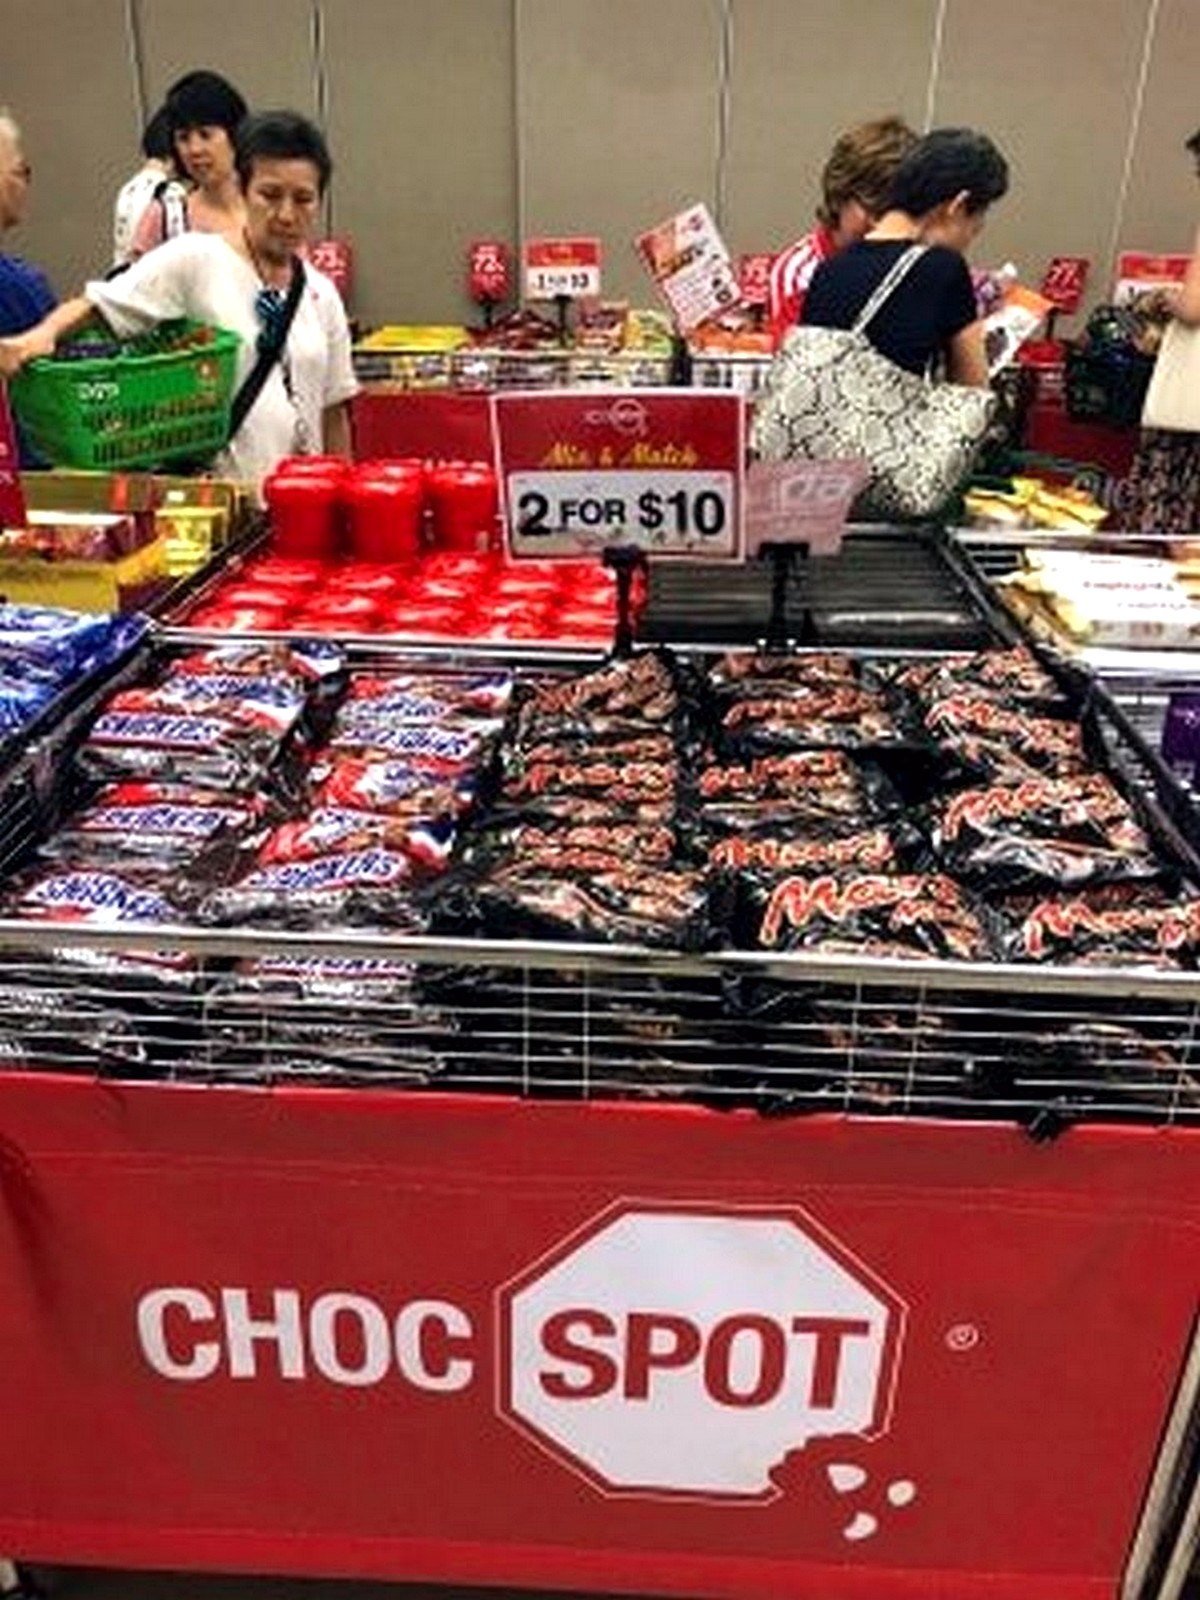 Choc-Spot-Warehouse-Sale-Singapore-2020-Clearance-Chocolate-Candy-Discounts-005 24 Jul-2 Aug 2020: Choc Spot Warehouse Sale! Up to 80% off Chocolates, Sweets, Chips, Biscuits!